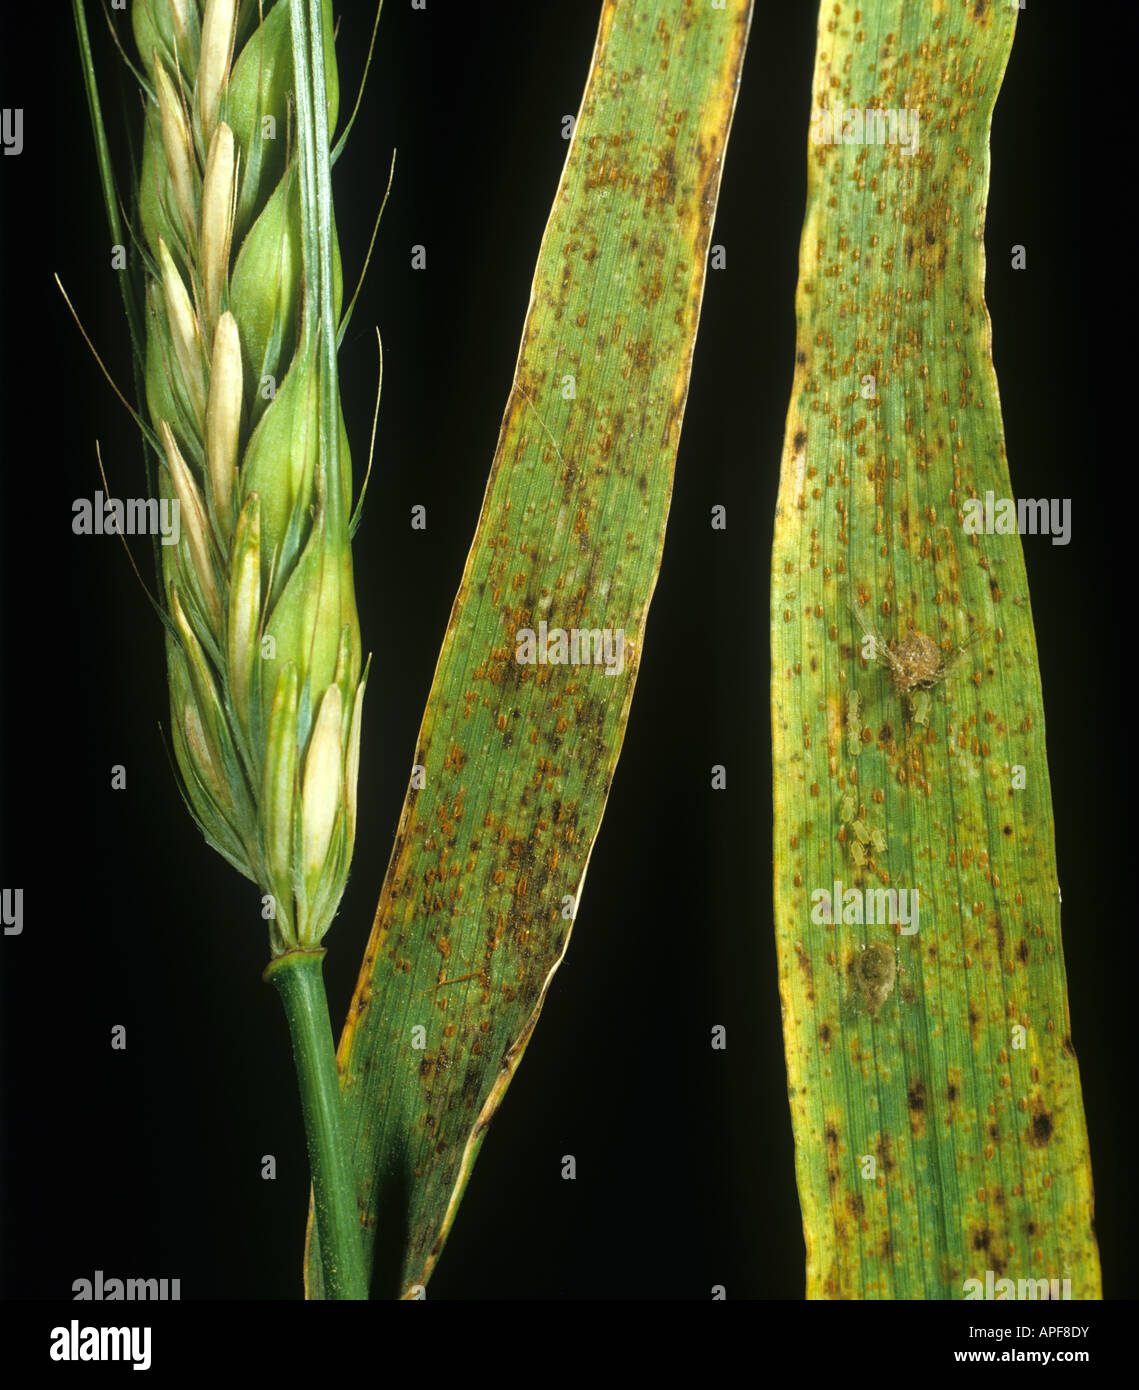 Brown rust Puccinia hordei infection on barley flag leaves Stock Photo